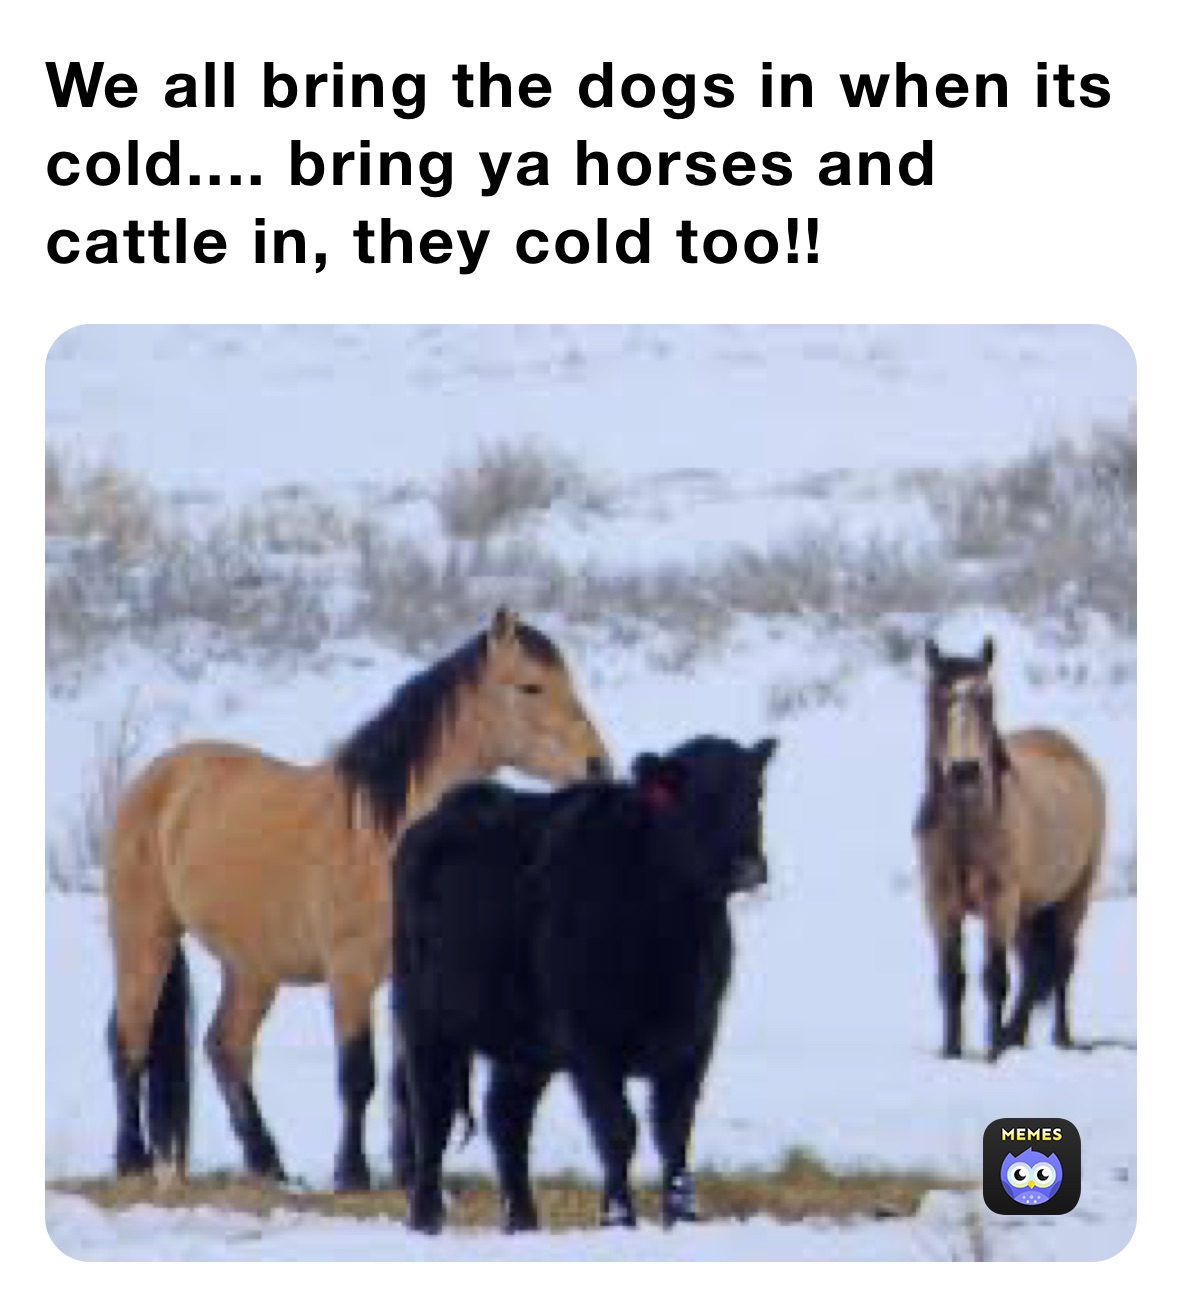 We all bring the dogs in when its cold.... bring ya horses and cattle in, they cold too!!  